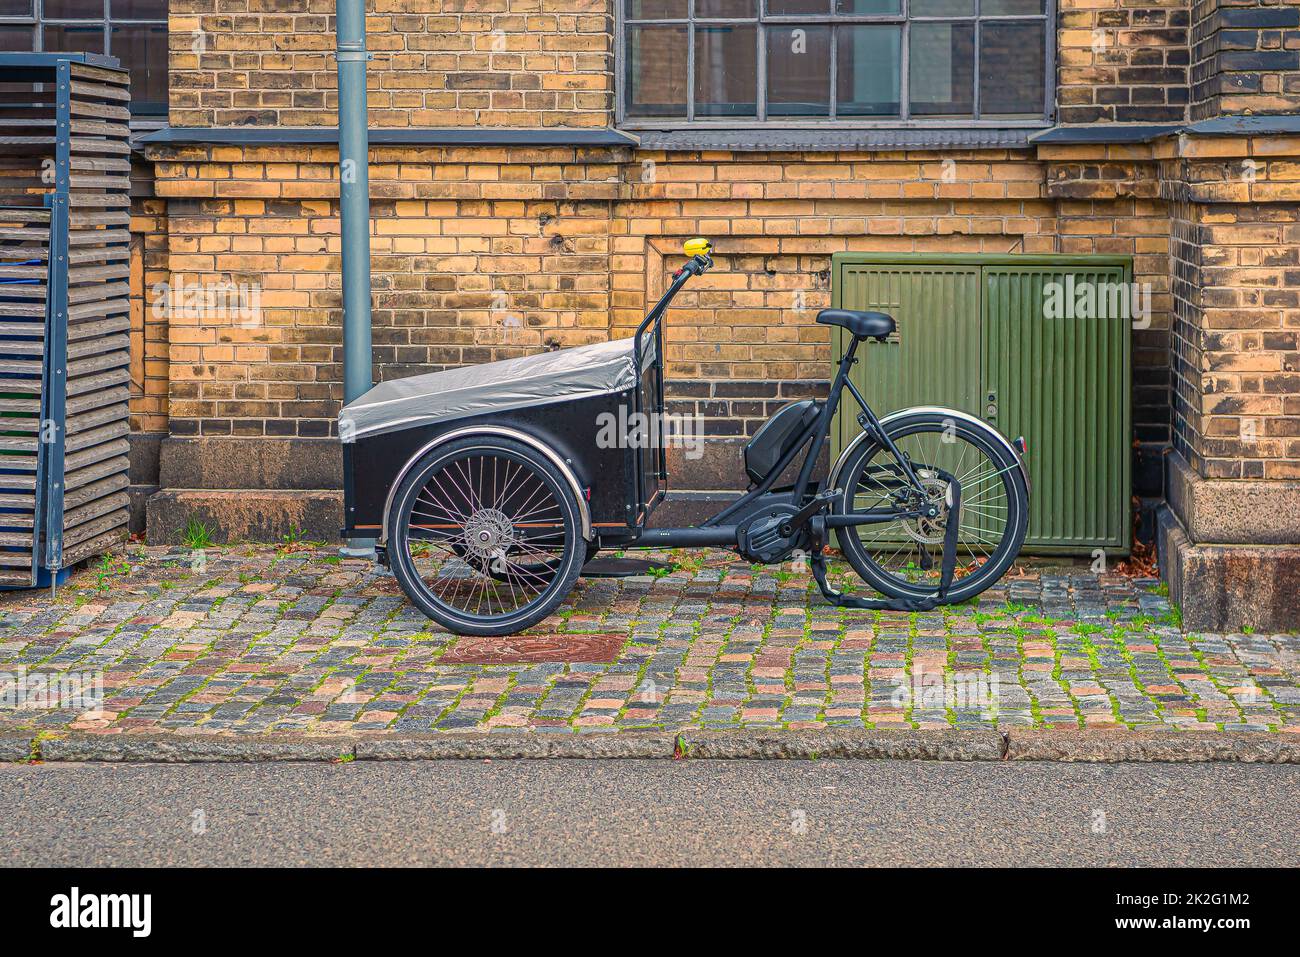 A tricycle cargo family bike with box for the transport of children stands on a street in old town. Copenhagen, Denmark Stock Photo